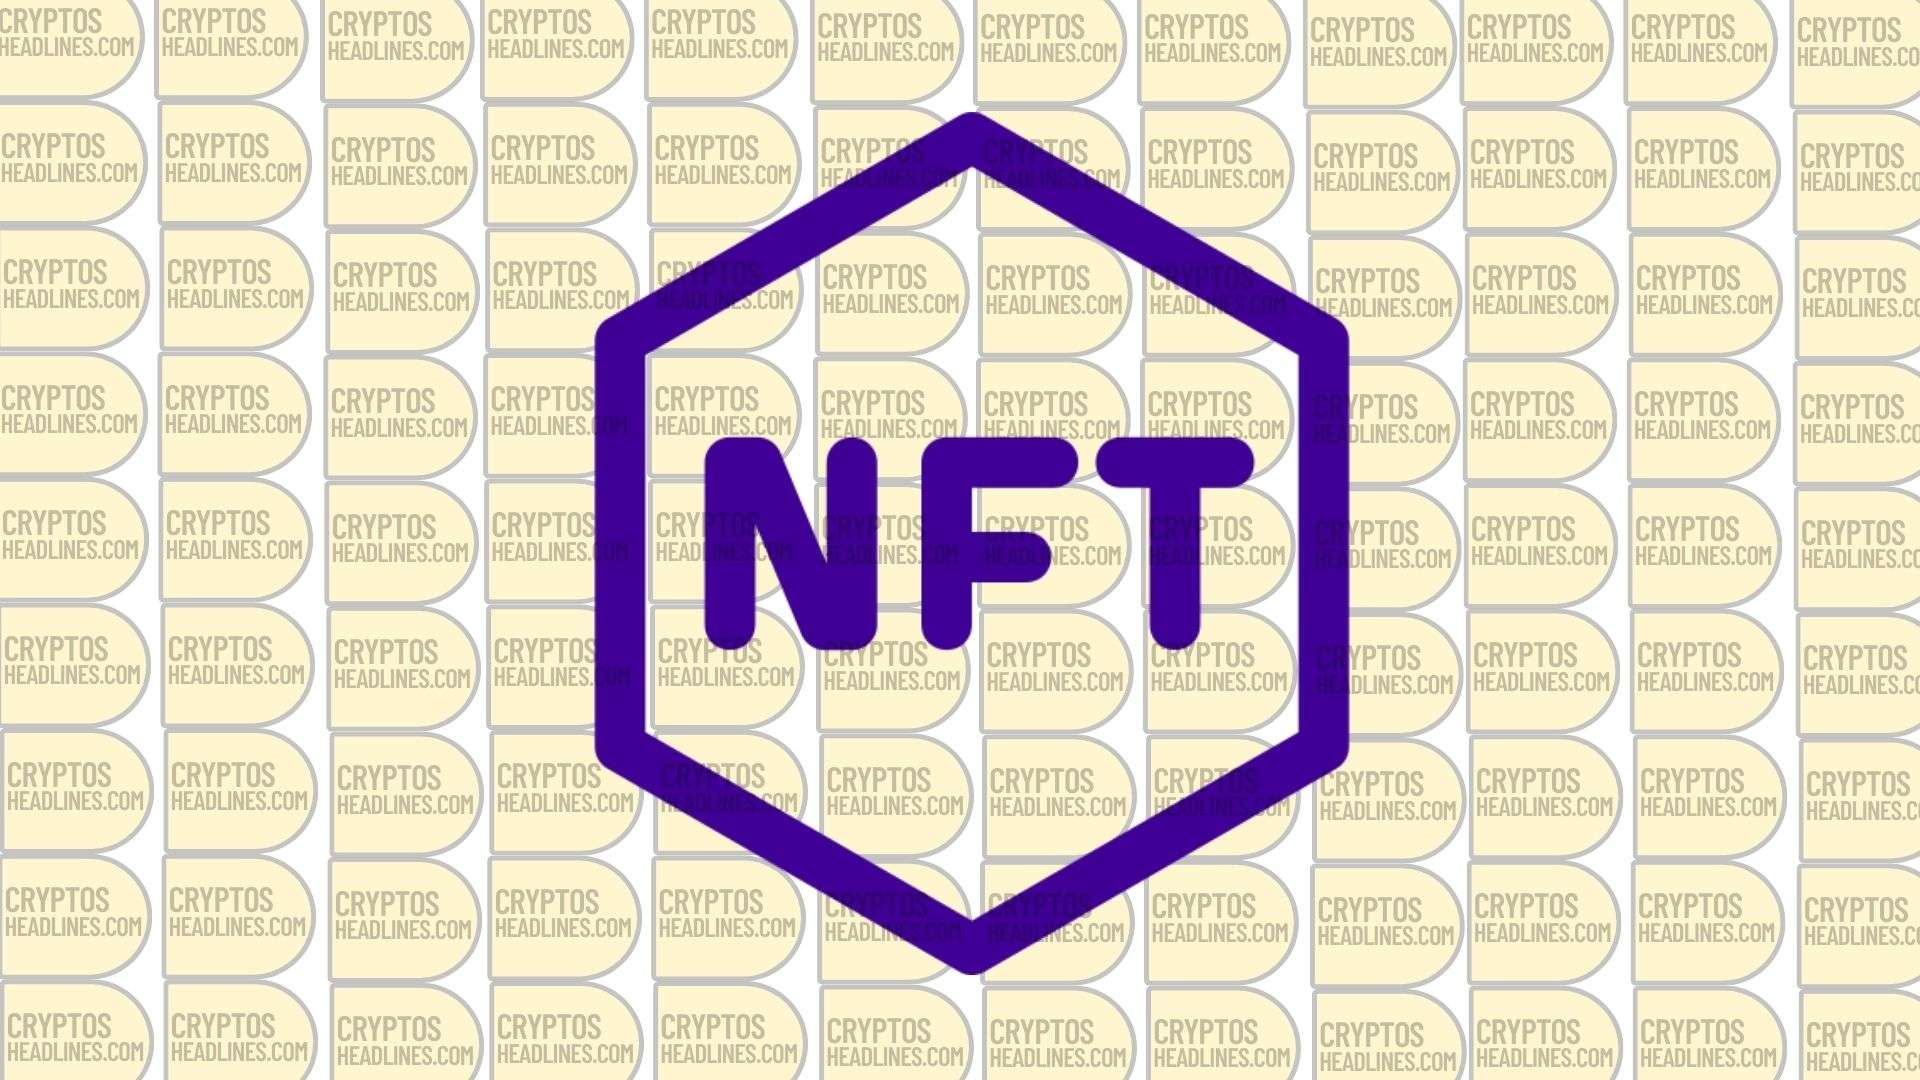 Mid-May Sees 8.97% Drop in NFT Sales; Top 4 Chains Decline